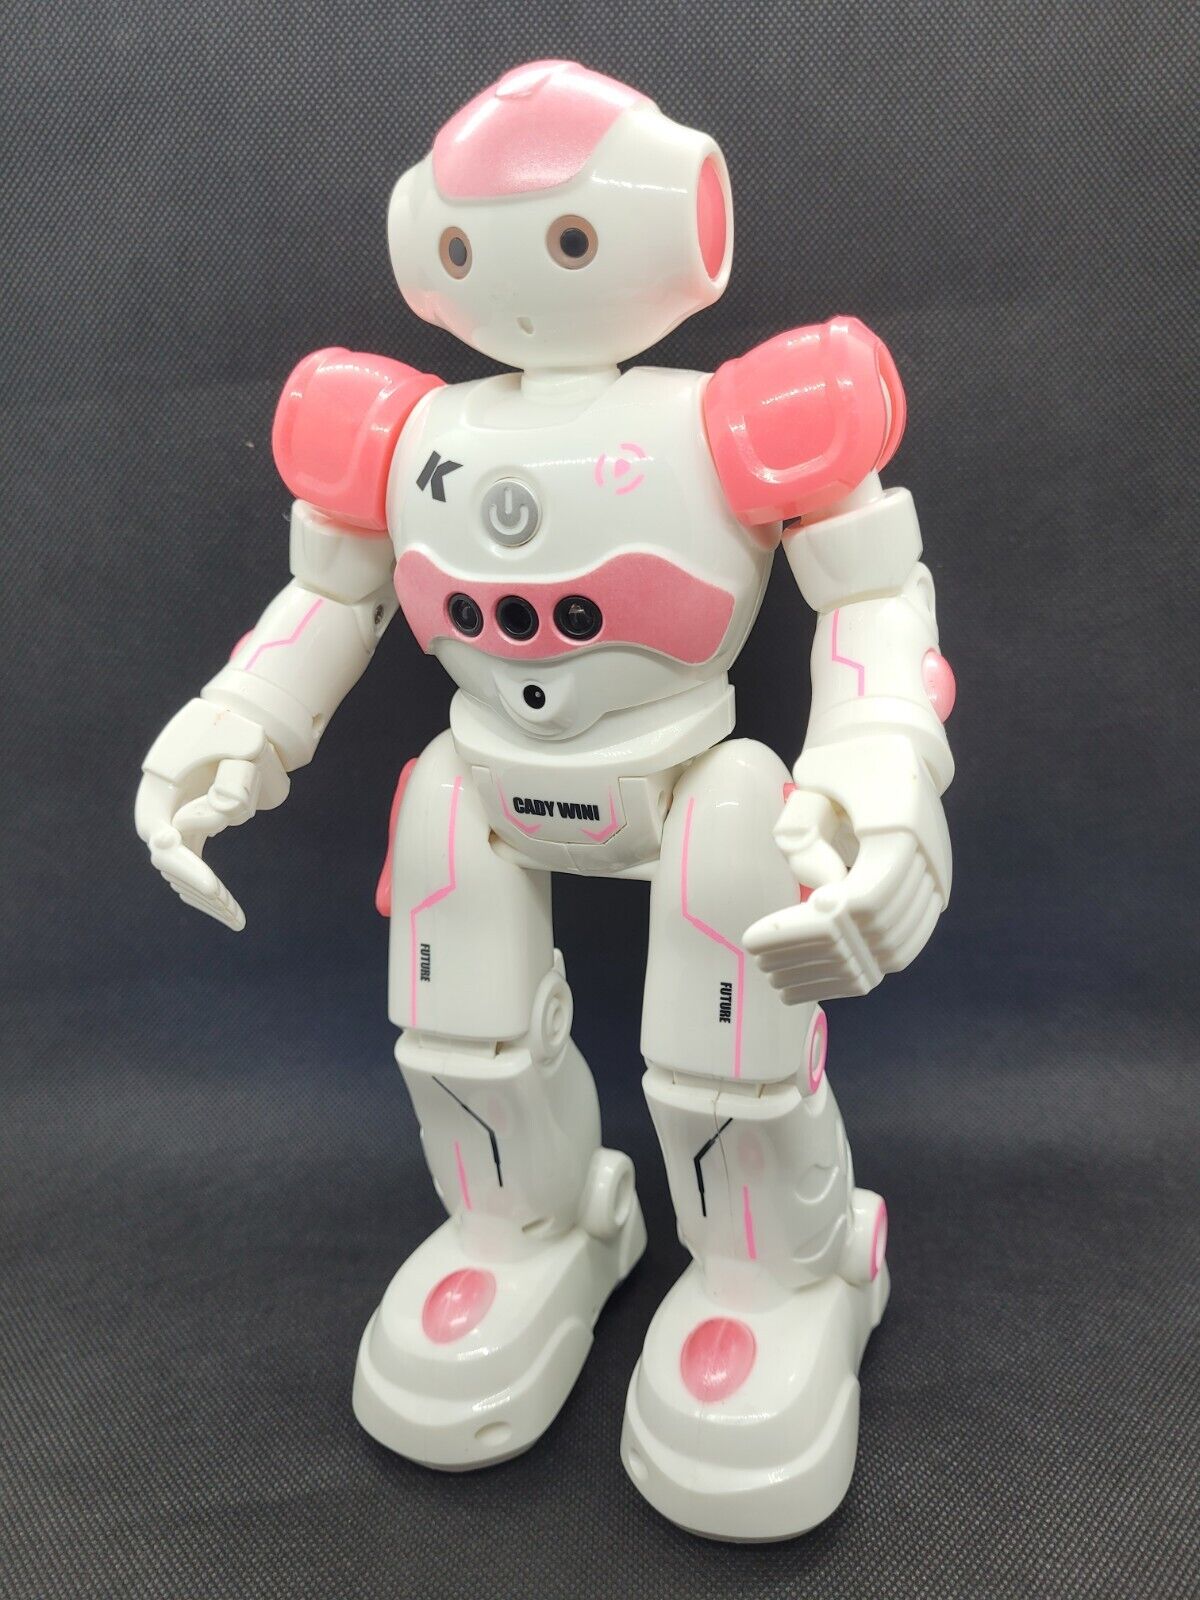 CADY WIDA Gesture Robot Toy Without Manual, No Controller. 